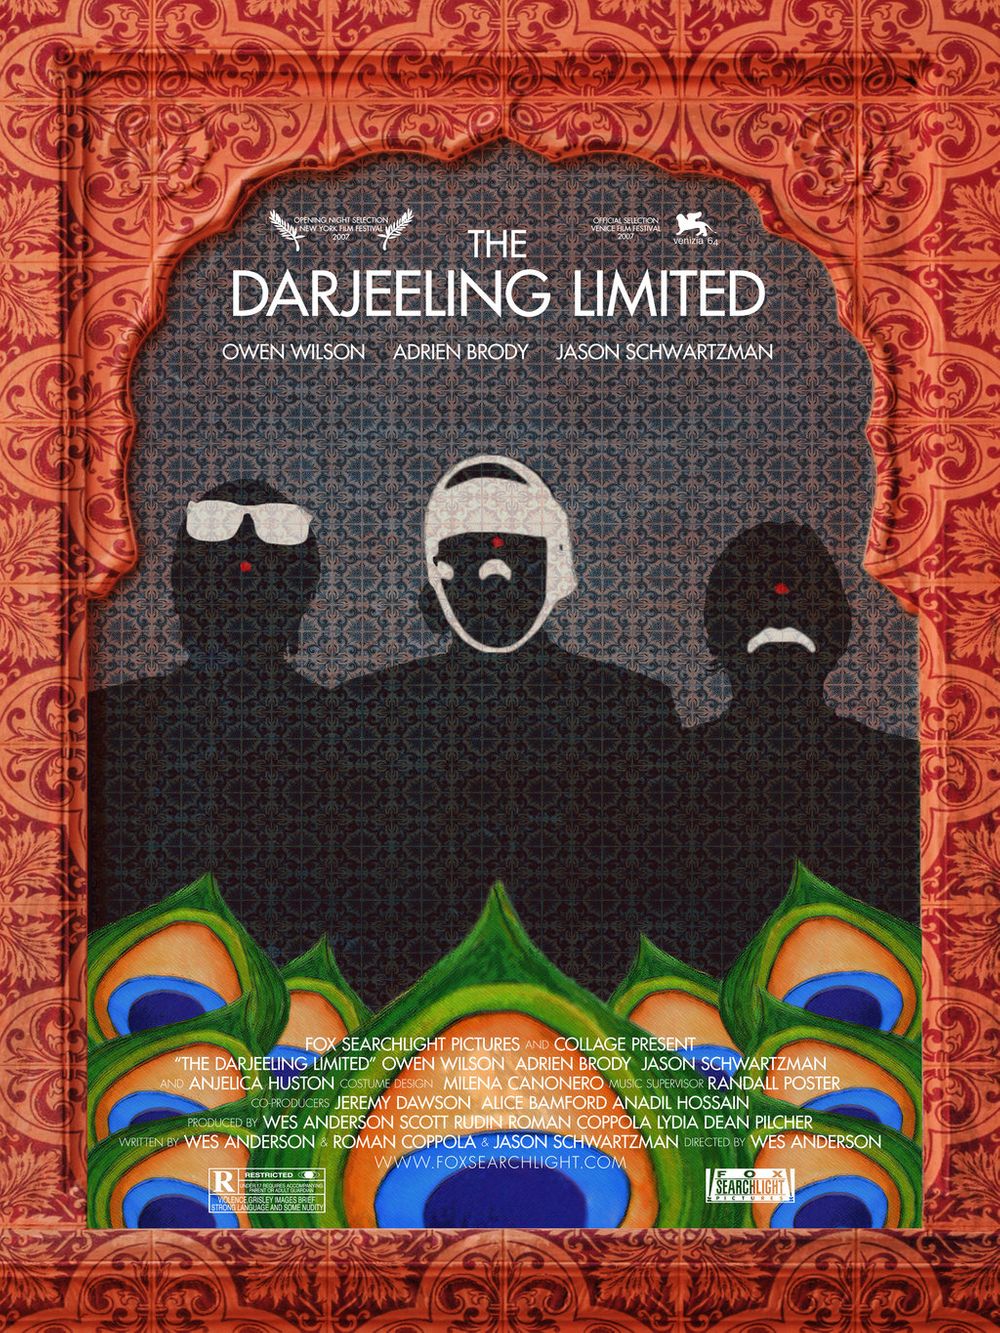 Wanted to share my poster for The Darjeeling Limited with some